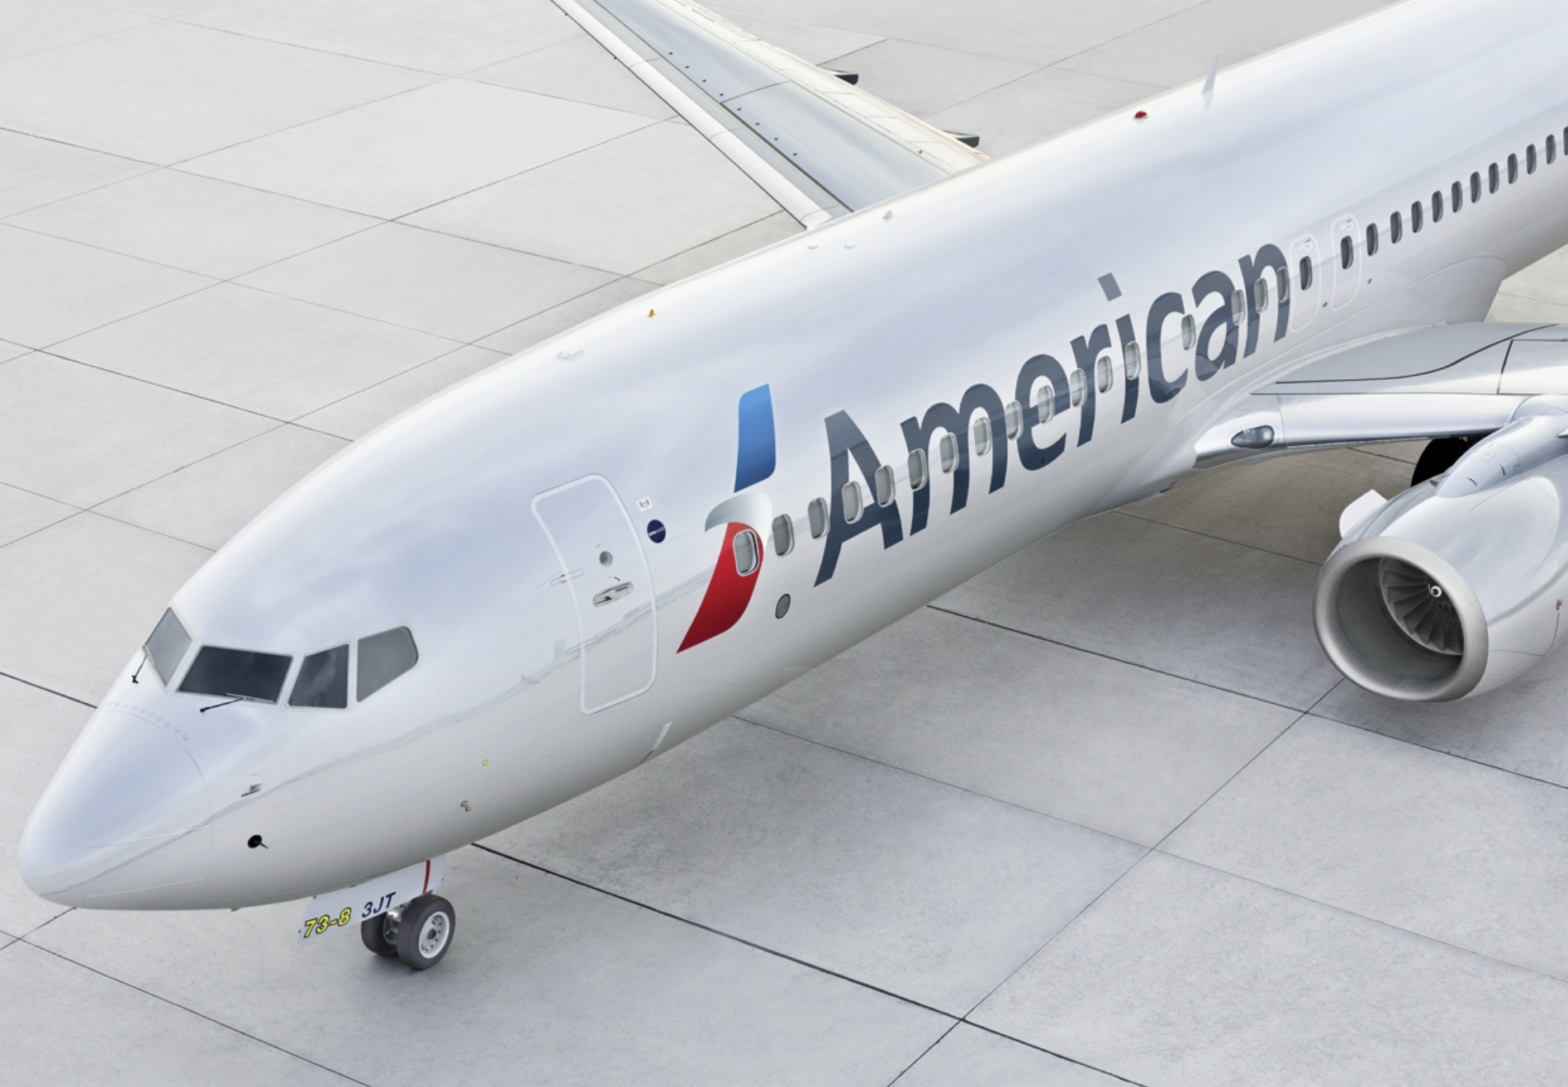 American Airlines Refuses To Let Unaccompanied Minor Purchase Food During Layover